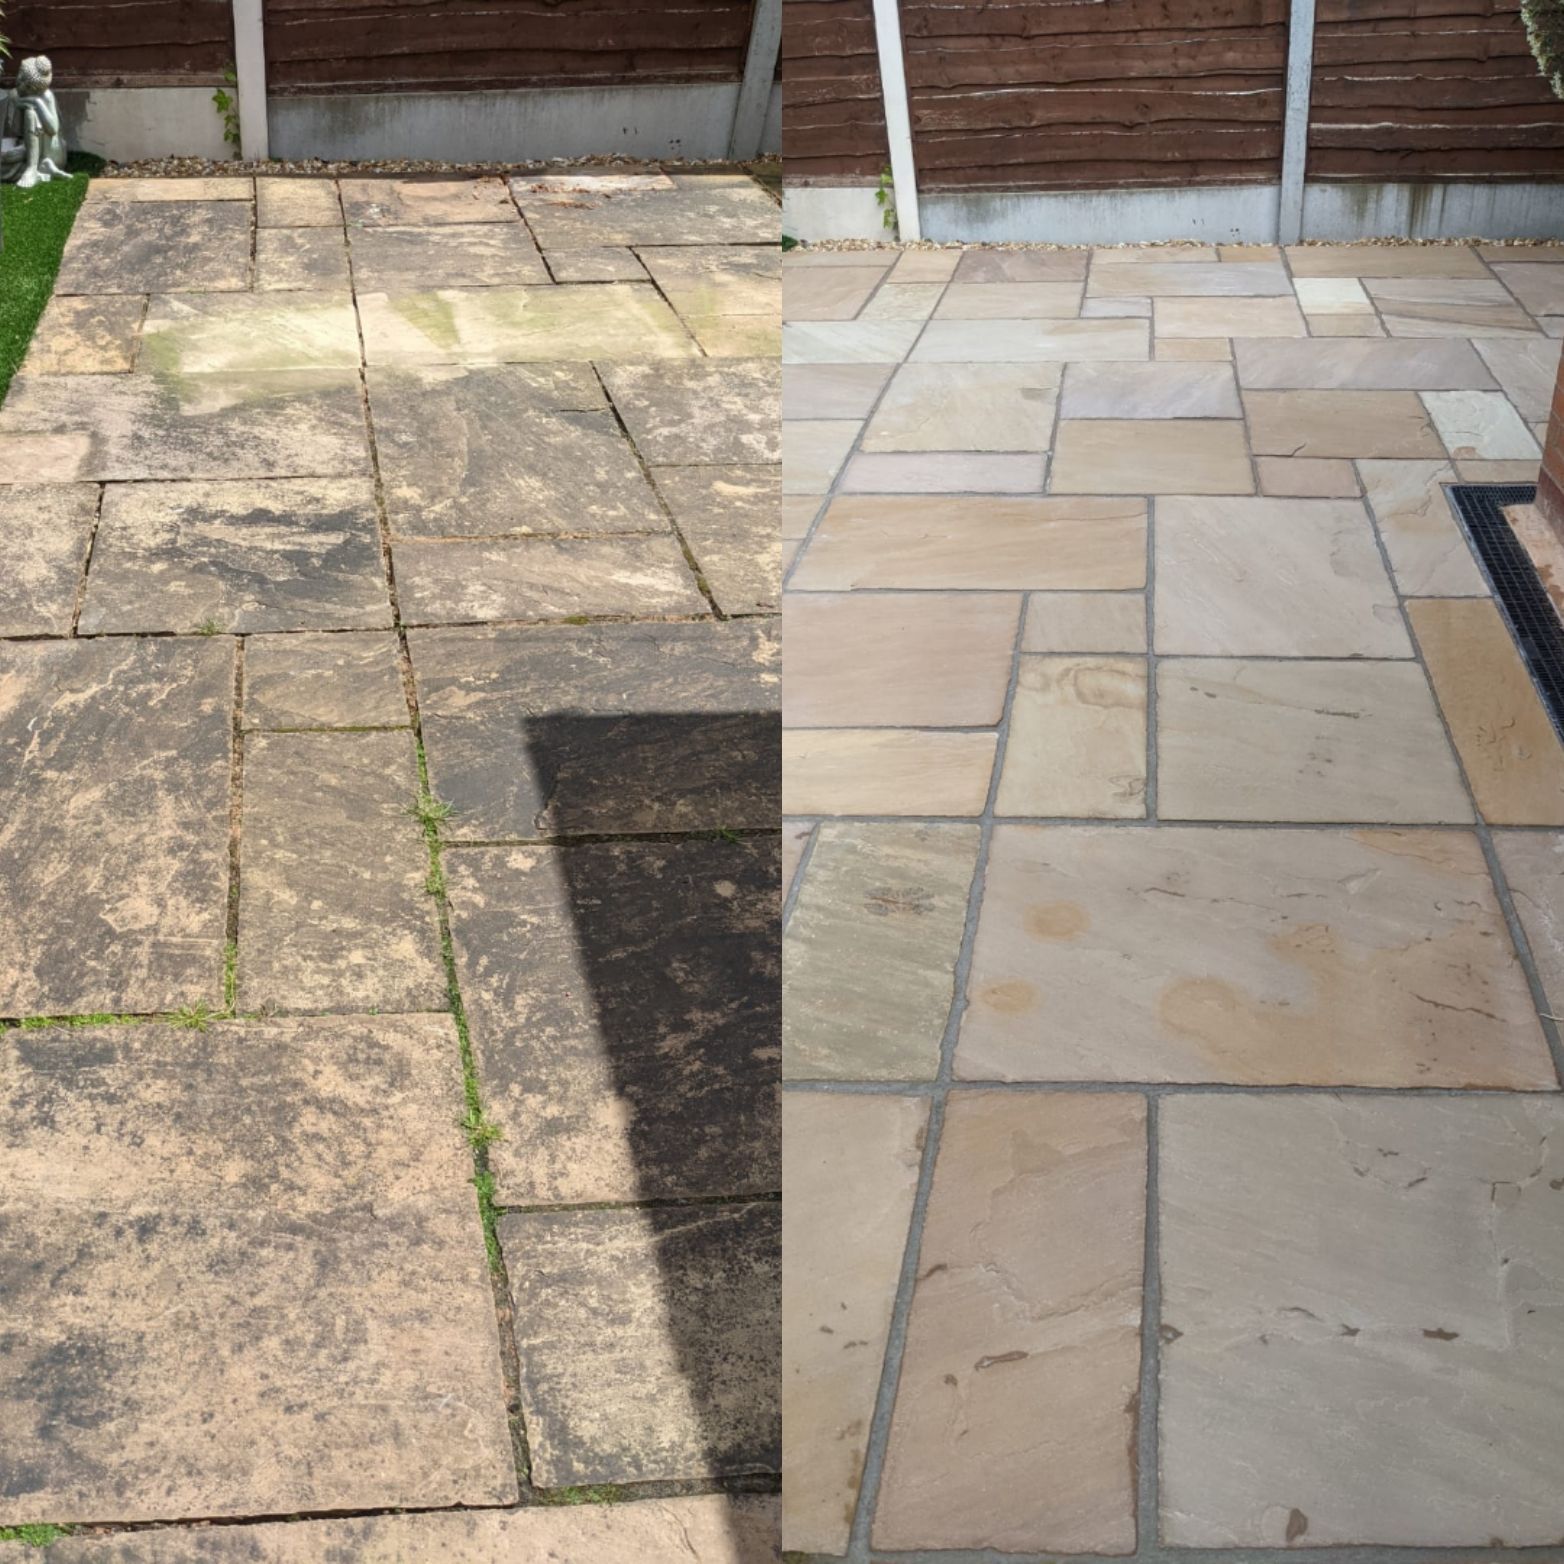 Indian Sandstone patio full restoration - deep cleaning, regrouting and sealing in Greater Manchester.